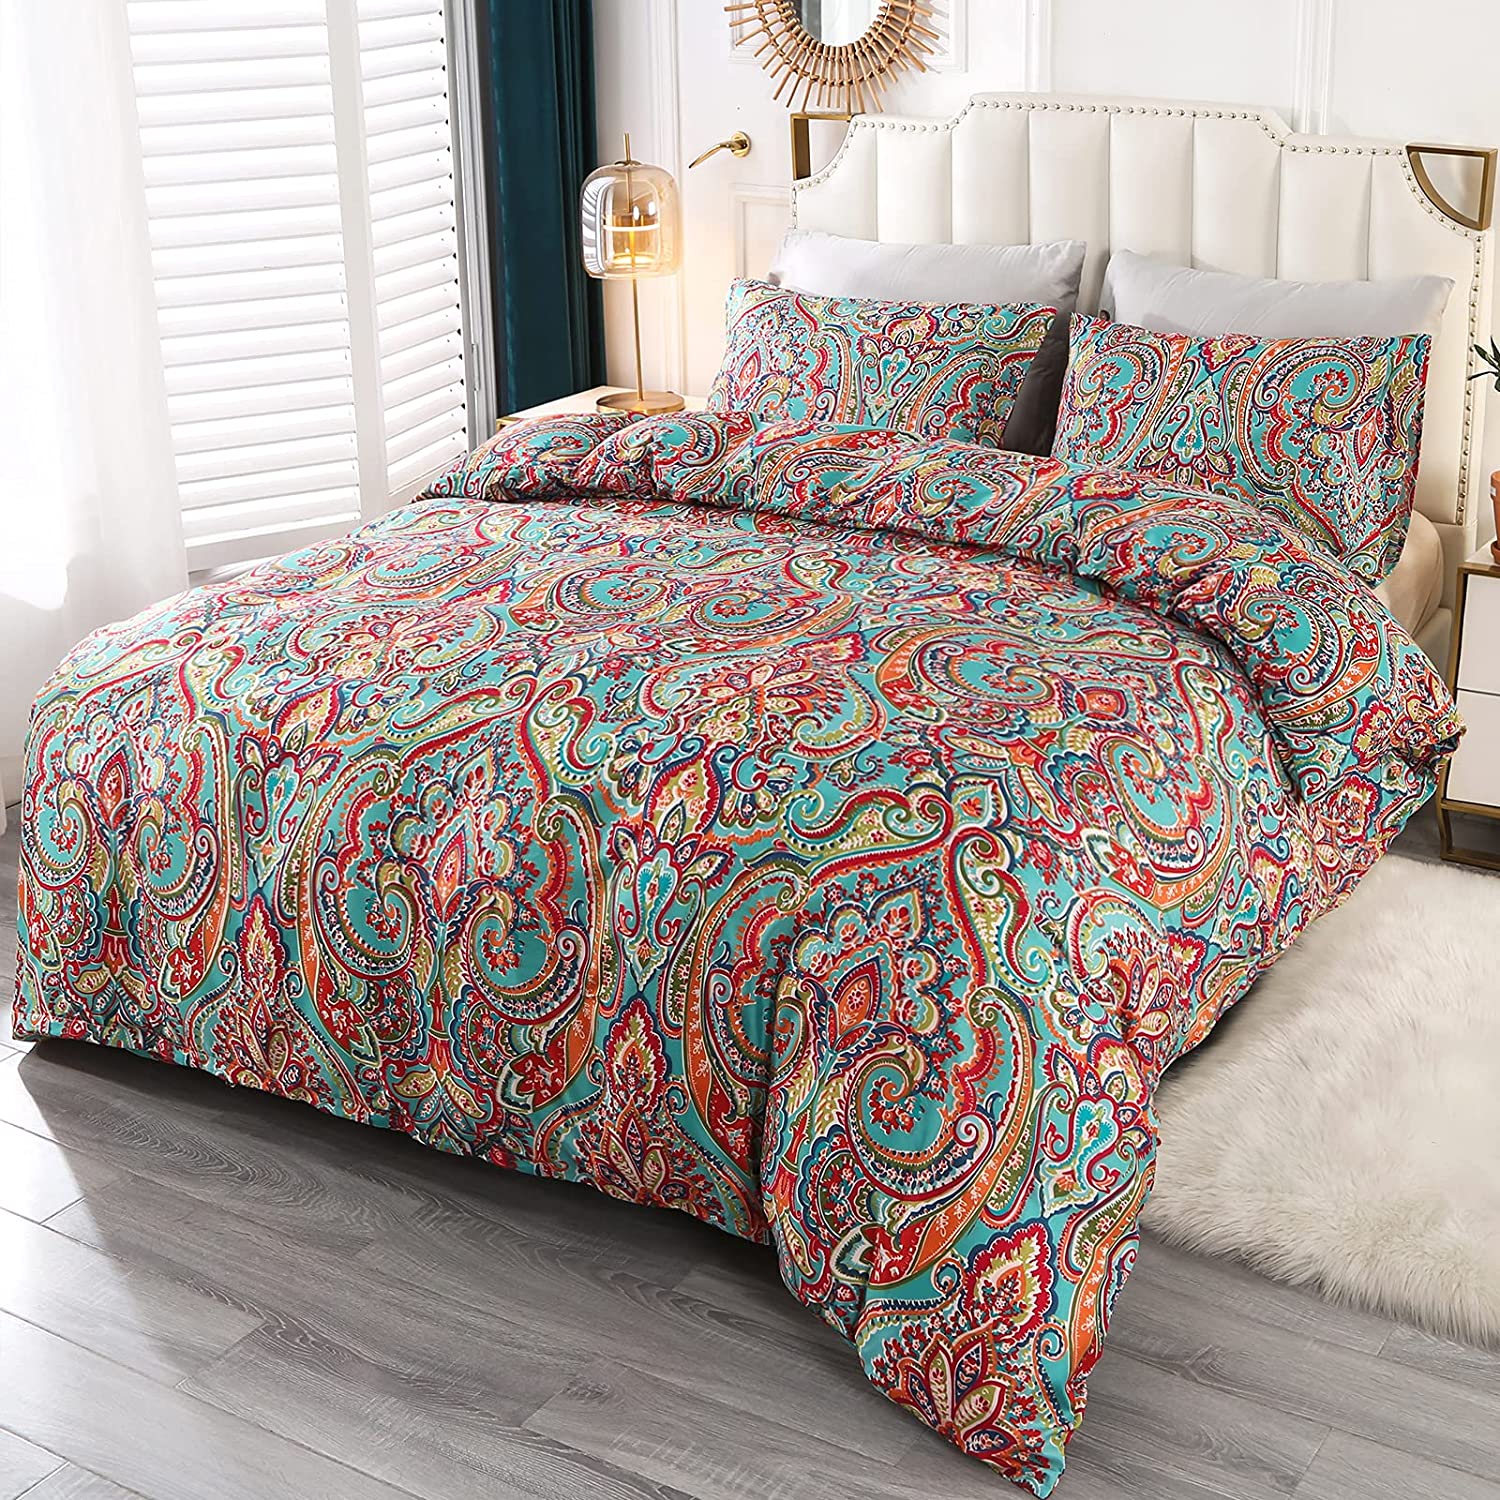 Price:$39.99  Style Paisley 3-Piece Bedding Duvet Cover Set with Pillow Cases (Style3, King) : Home & Kitchen